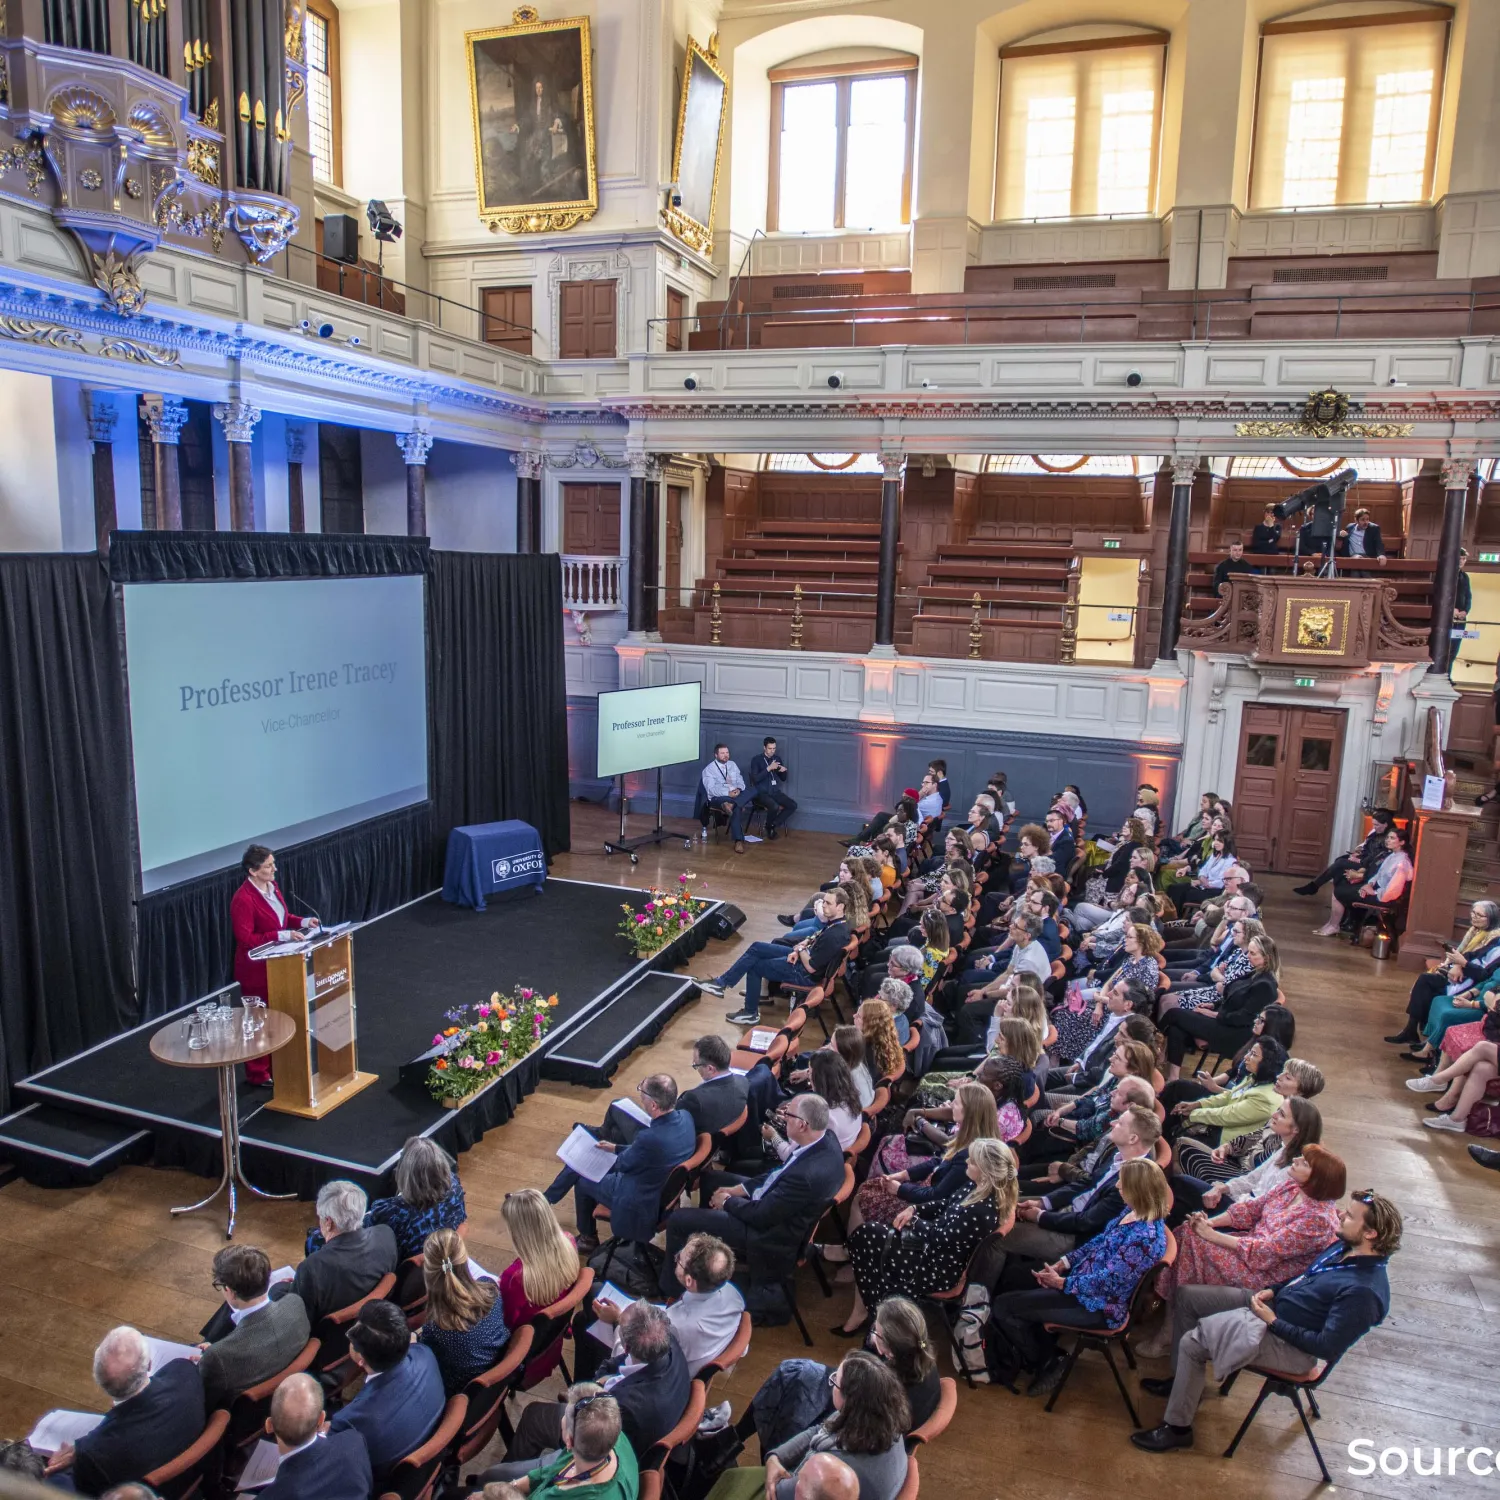 The Vice-Chancellor's Awards ceremony in the Sheldonian Theatre